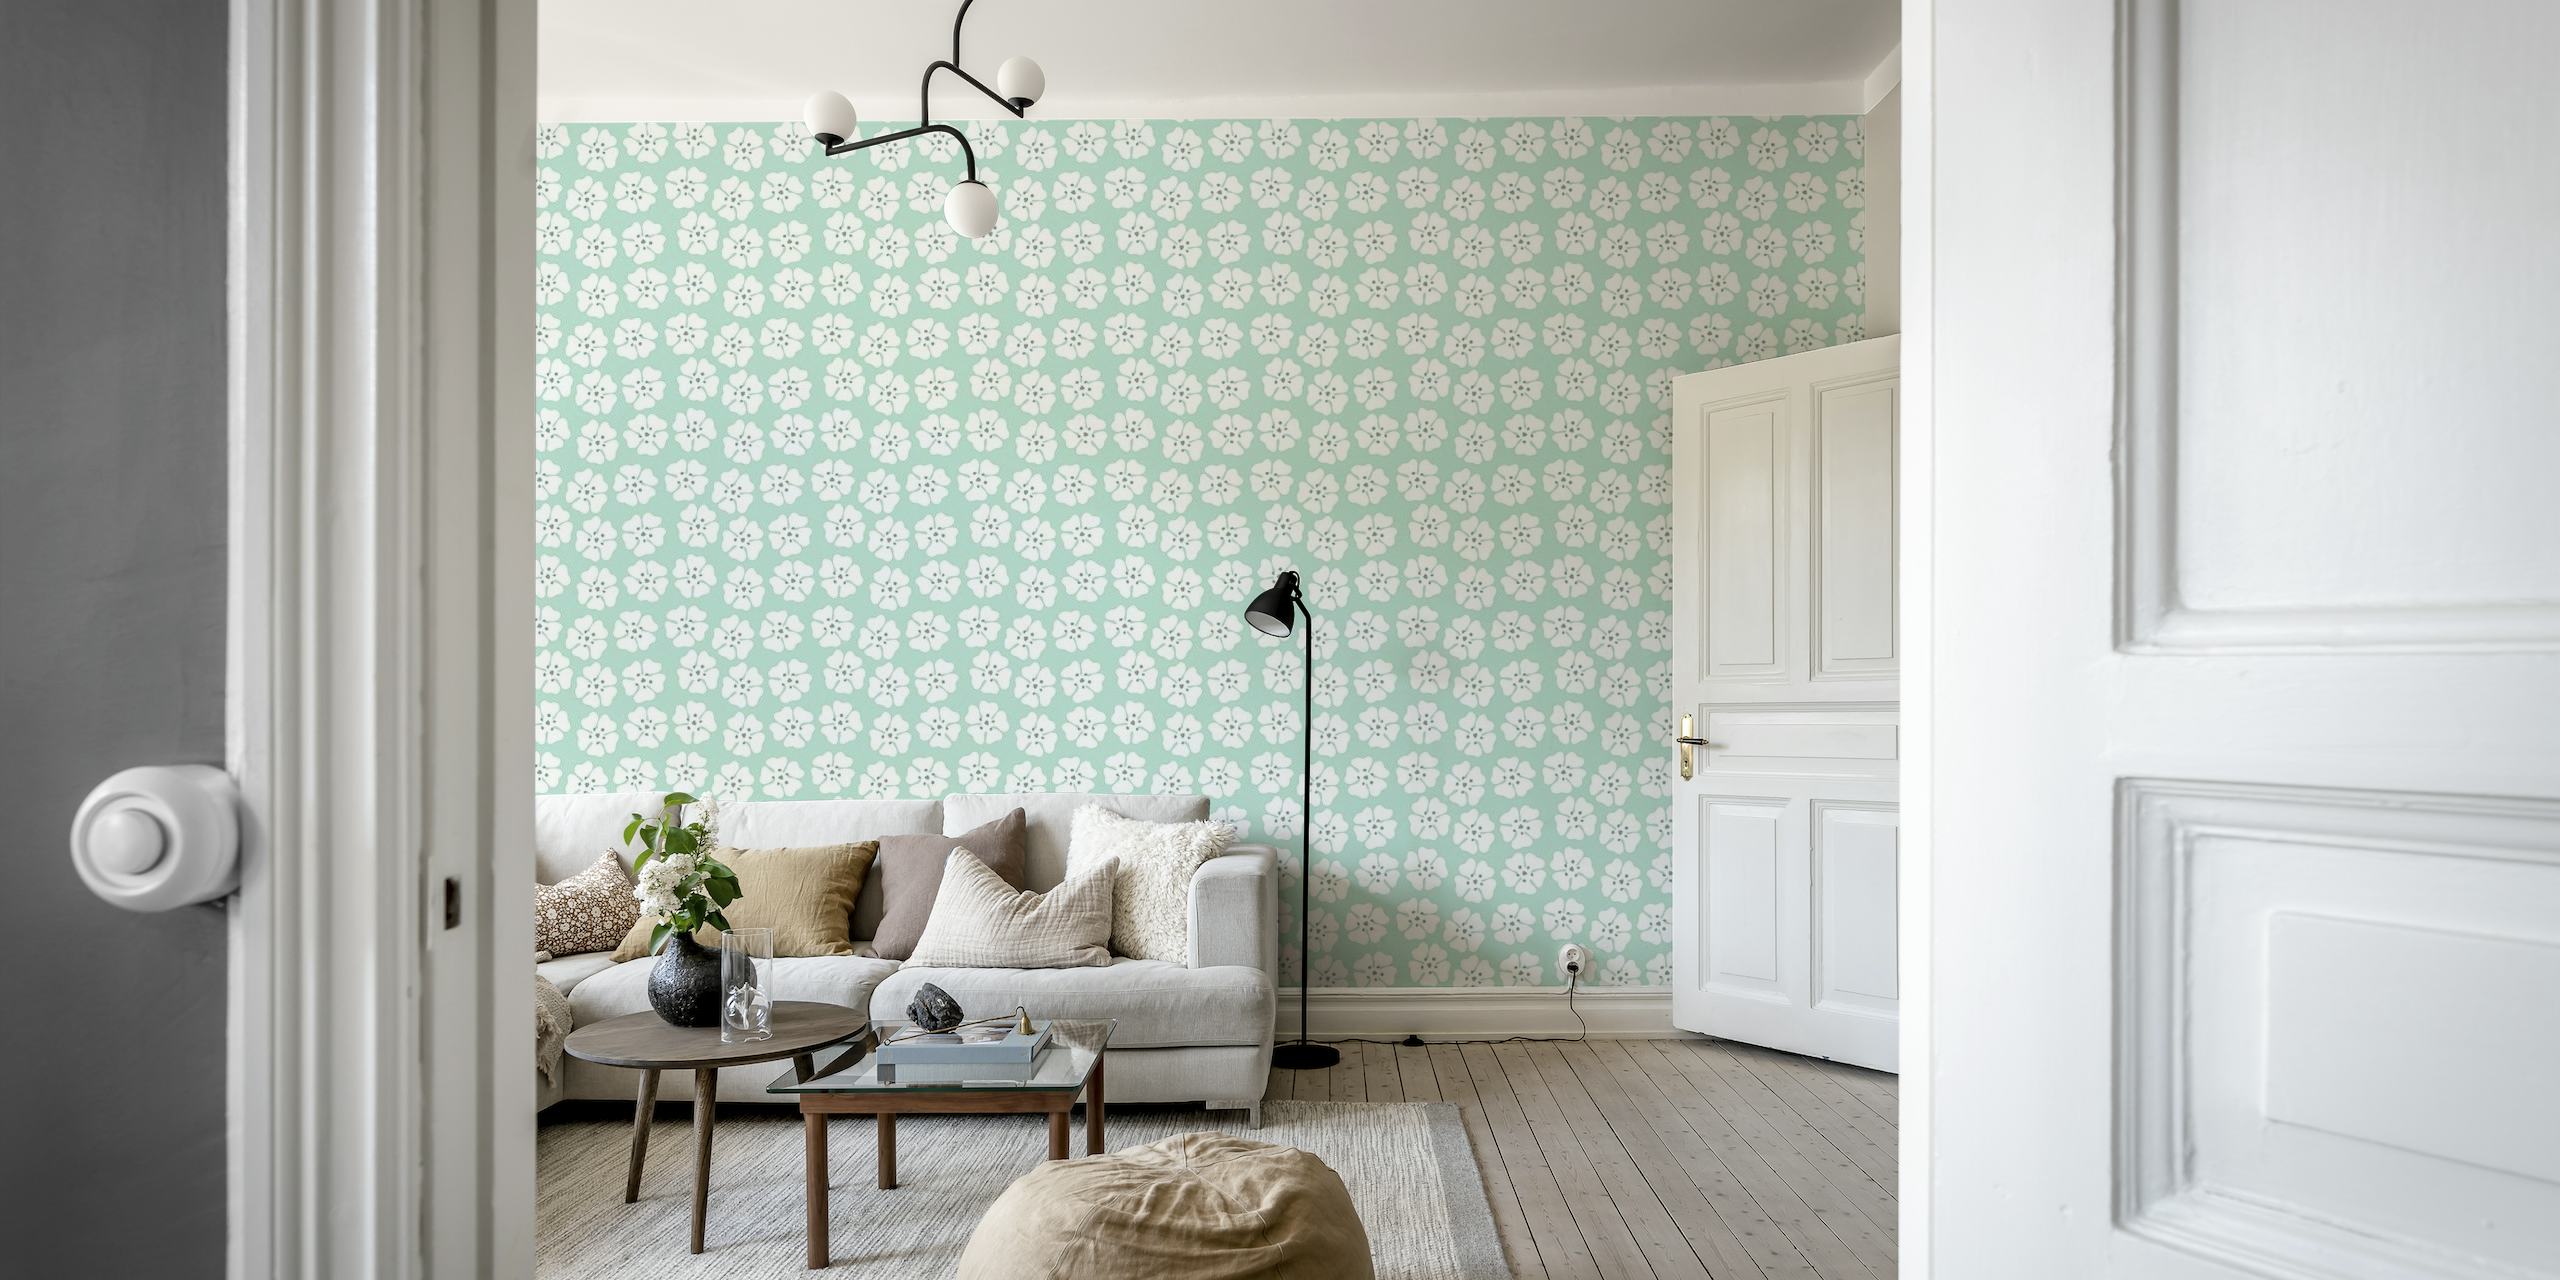 Minty floral behang